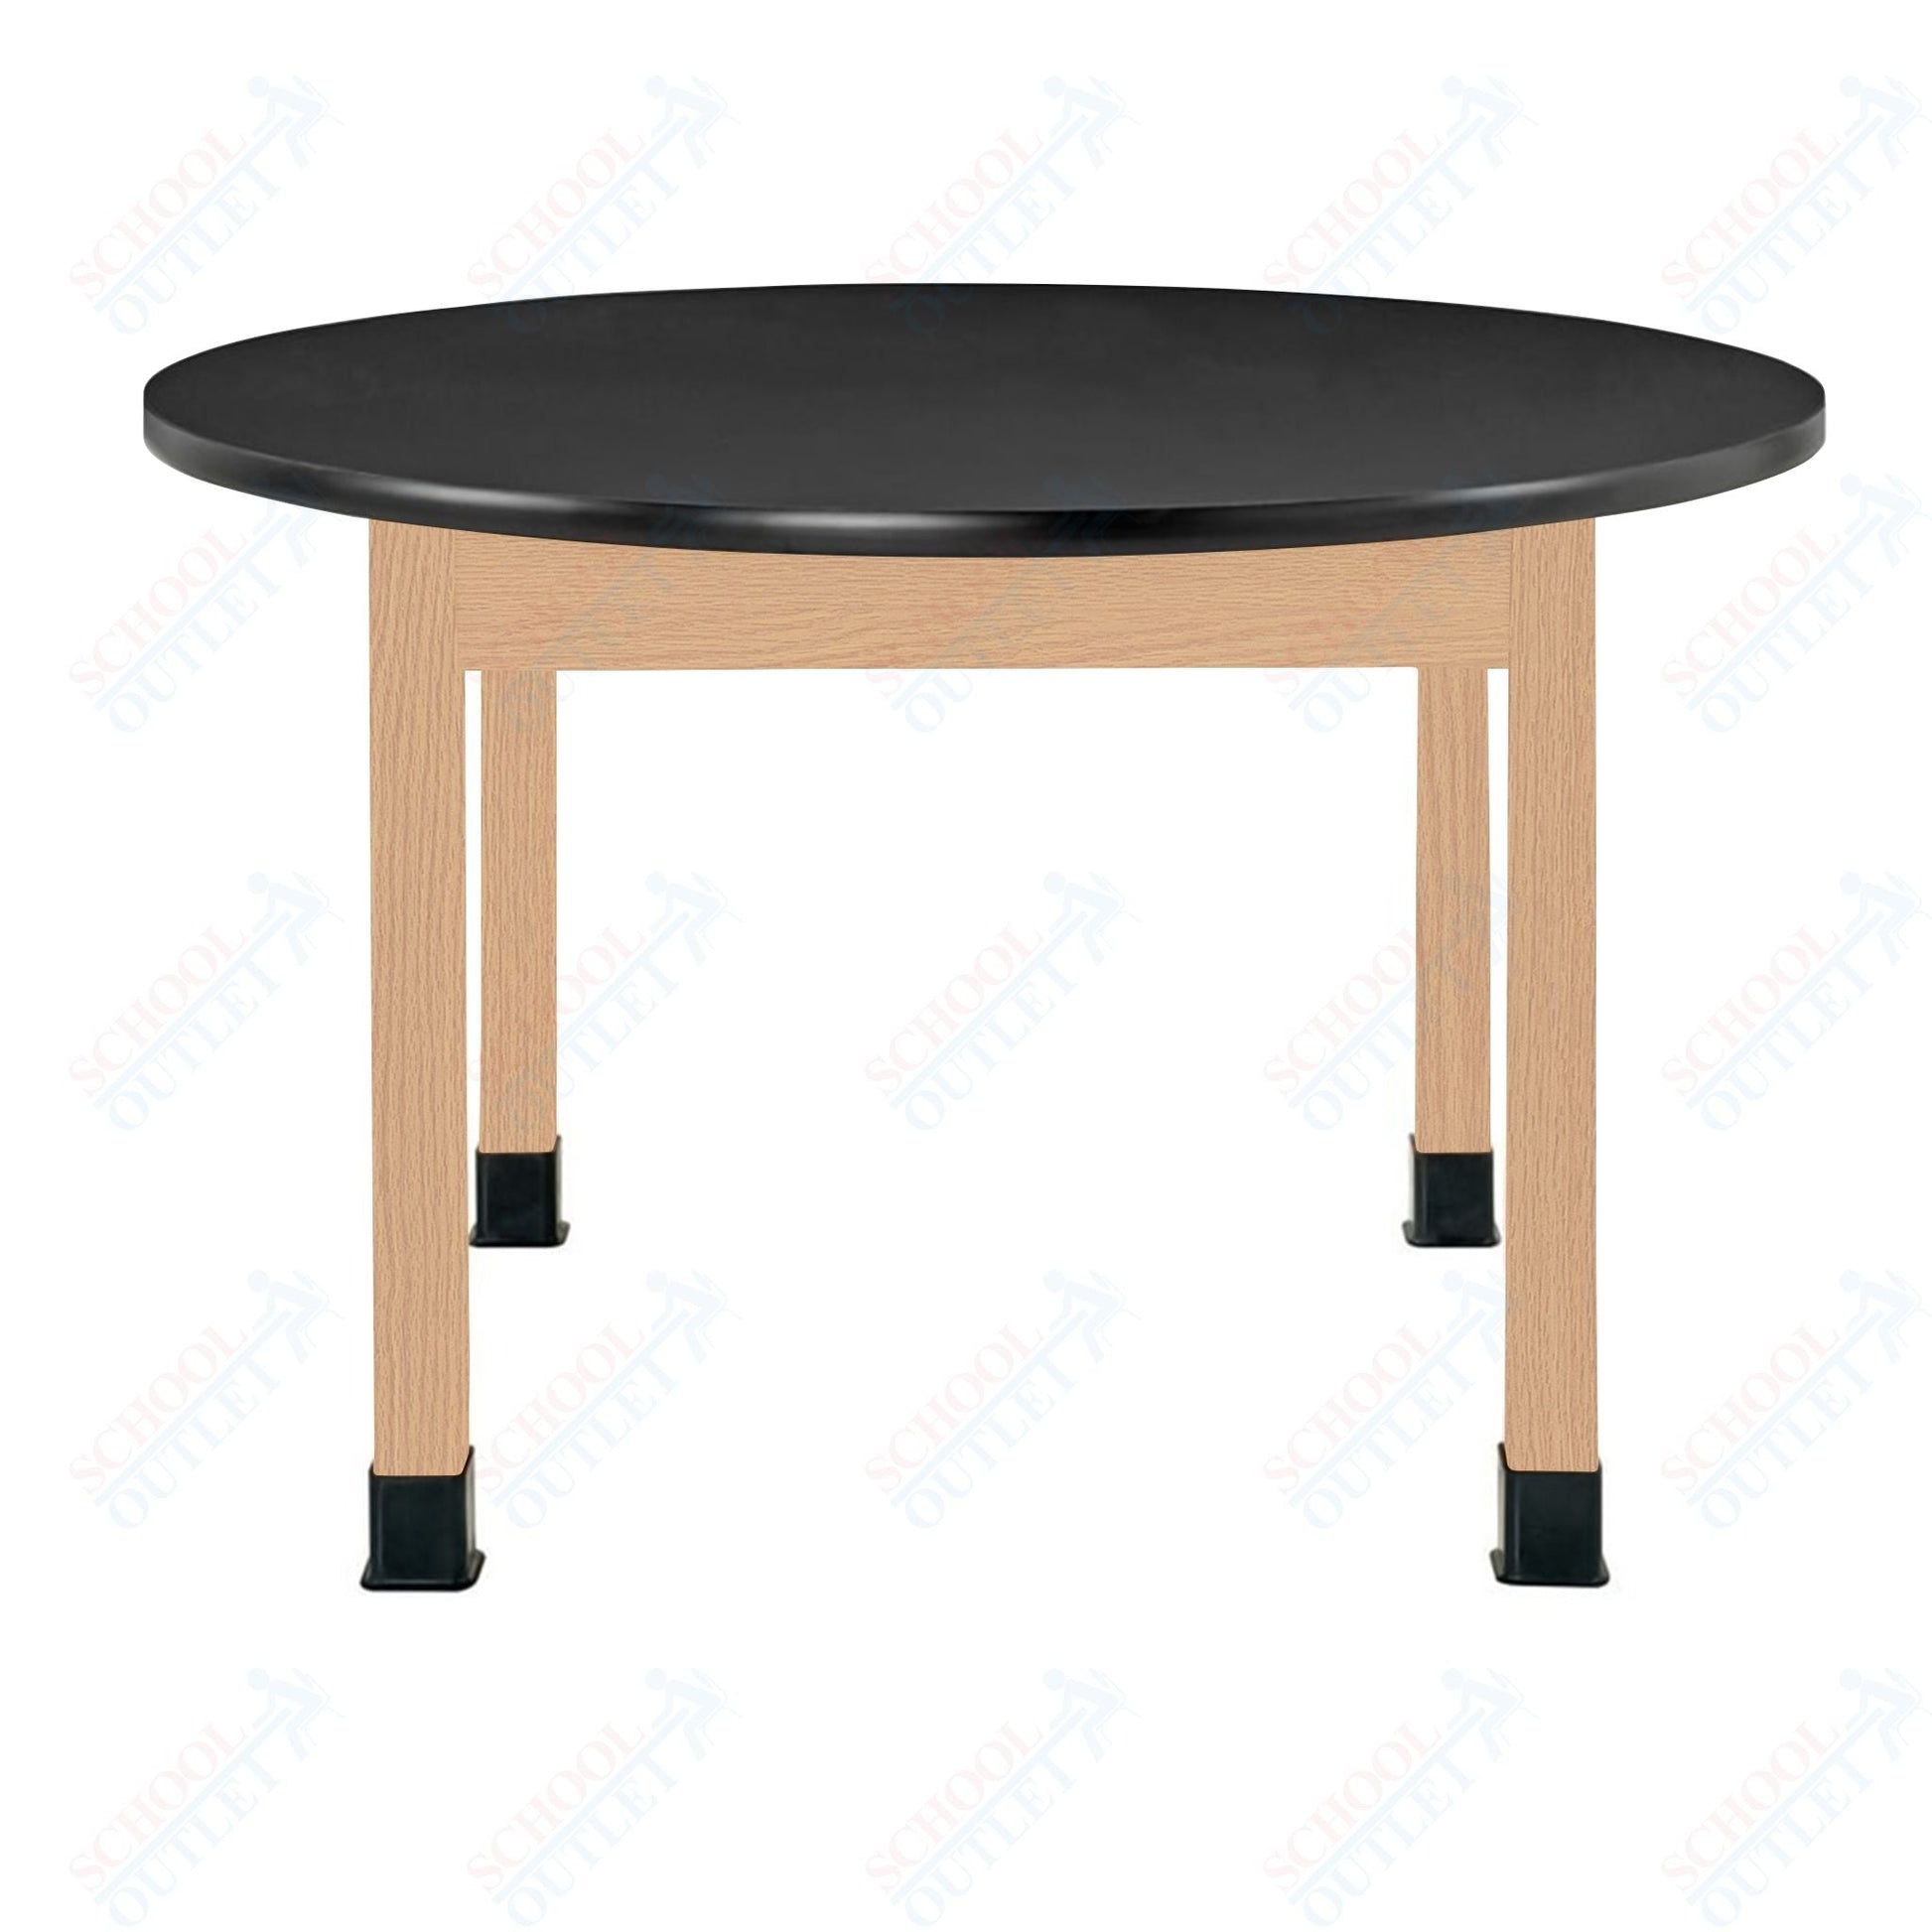 Diversified Woodcrafts Science Table - Plain Apron - Round 48" Diameter - Solid Wood Frame and Adjustable Glides - SchoolOutlet